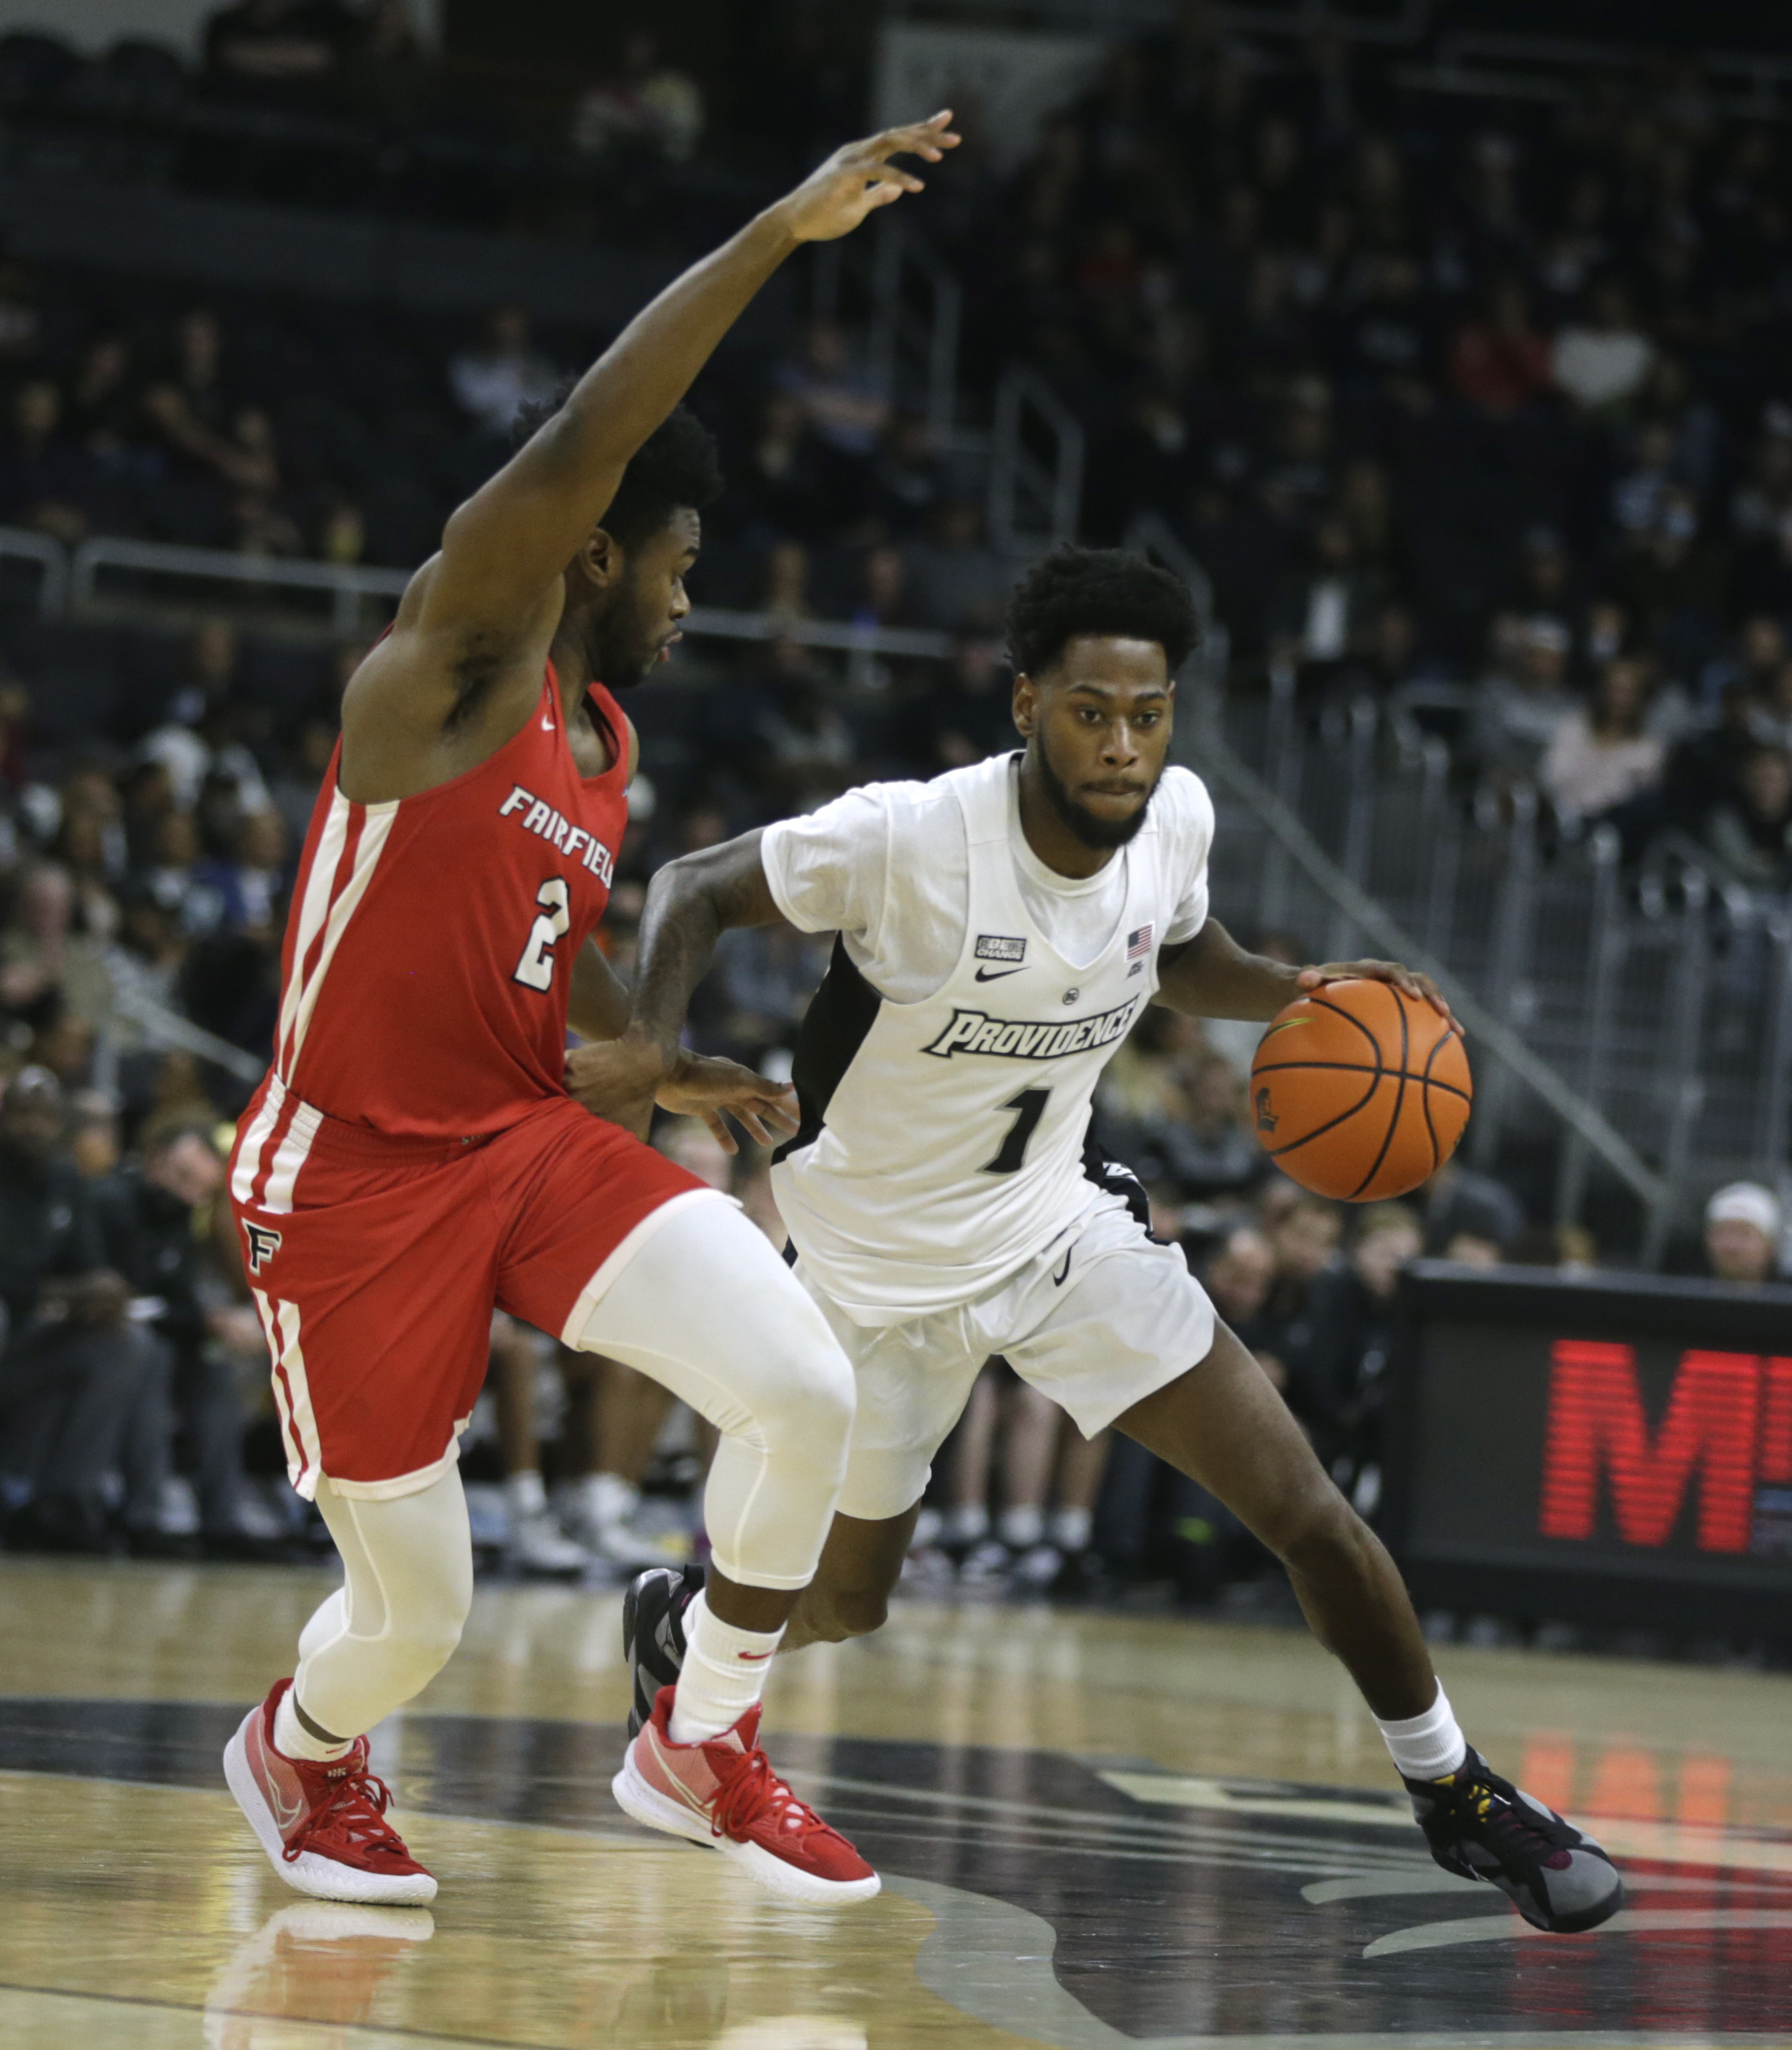 Providence Journal college basketball podcast: Friars with room to improve, URI-Bryant on tap, Brown visits Chapel Hill, more